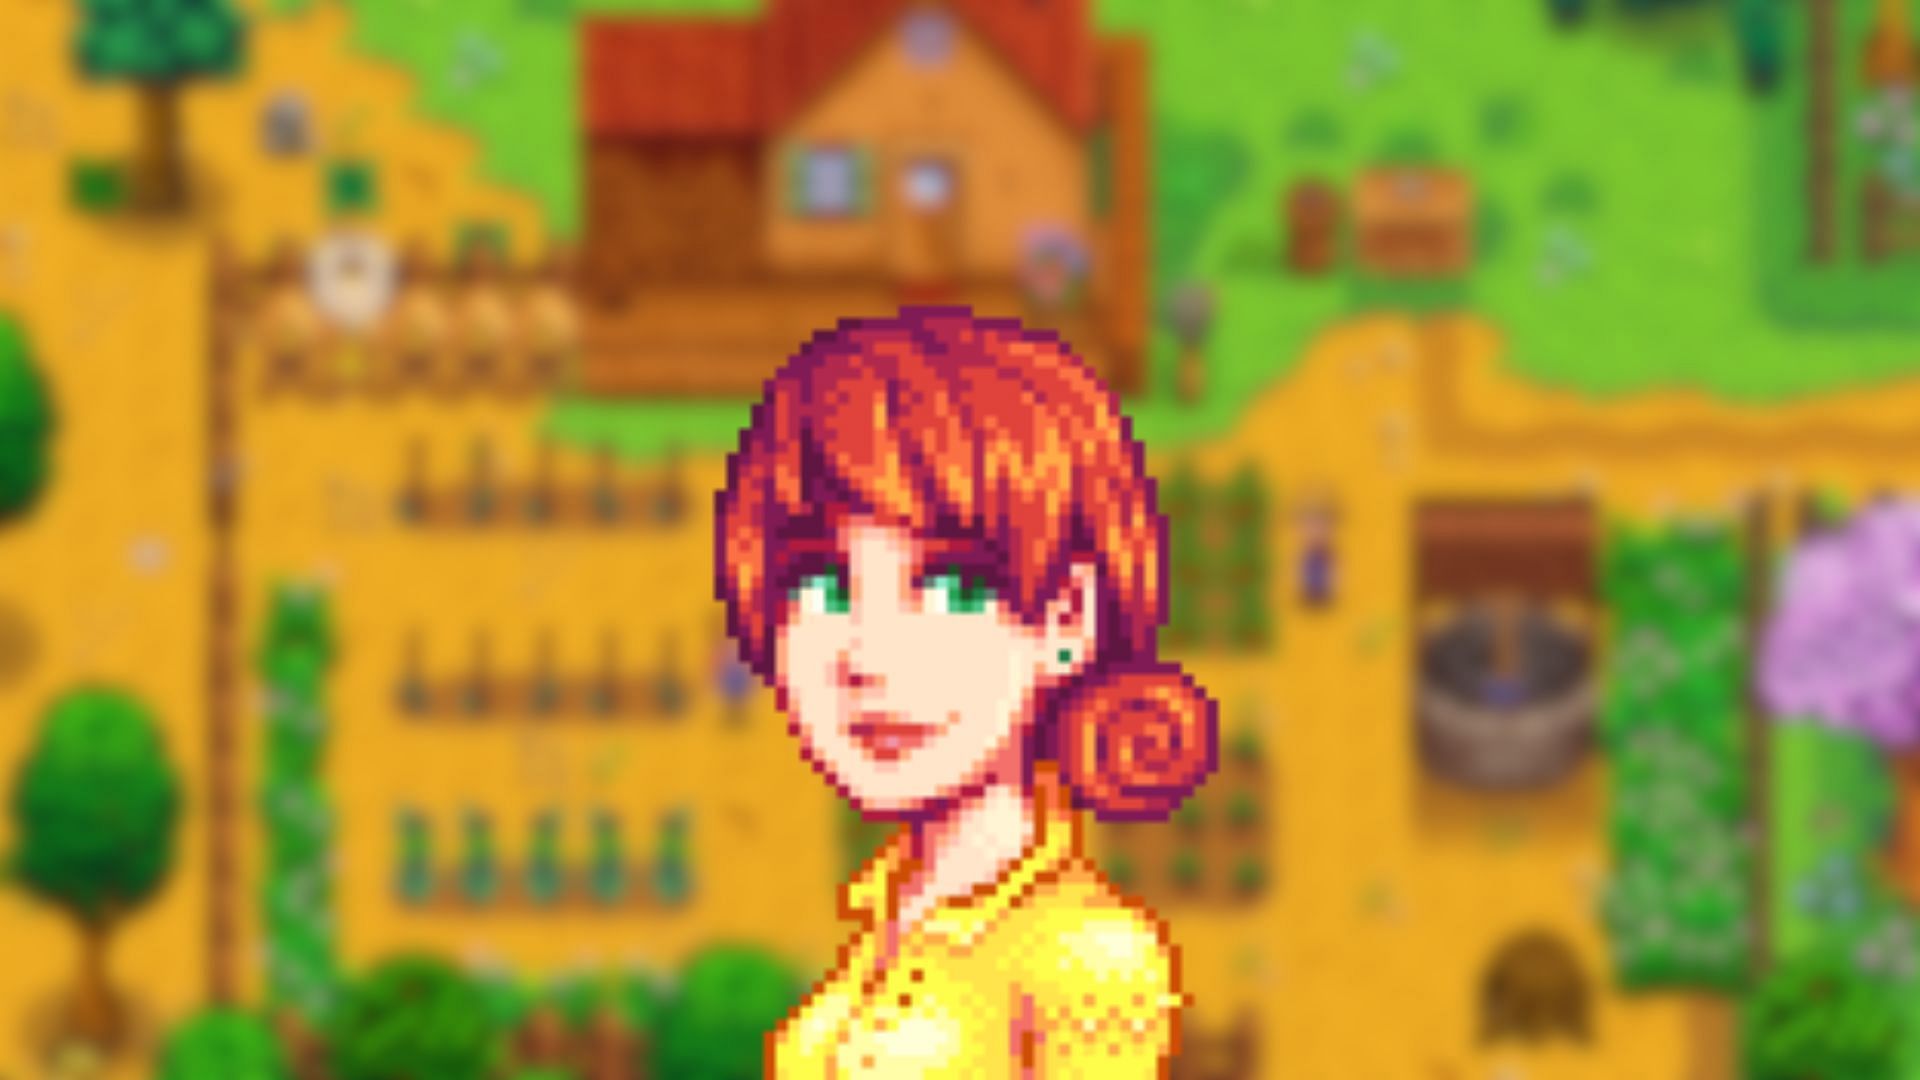 Penny remains a kind and innocent character despite her struggles with her alcoholic mother. (Image via ConcernedApe)